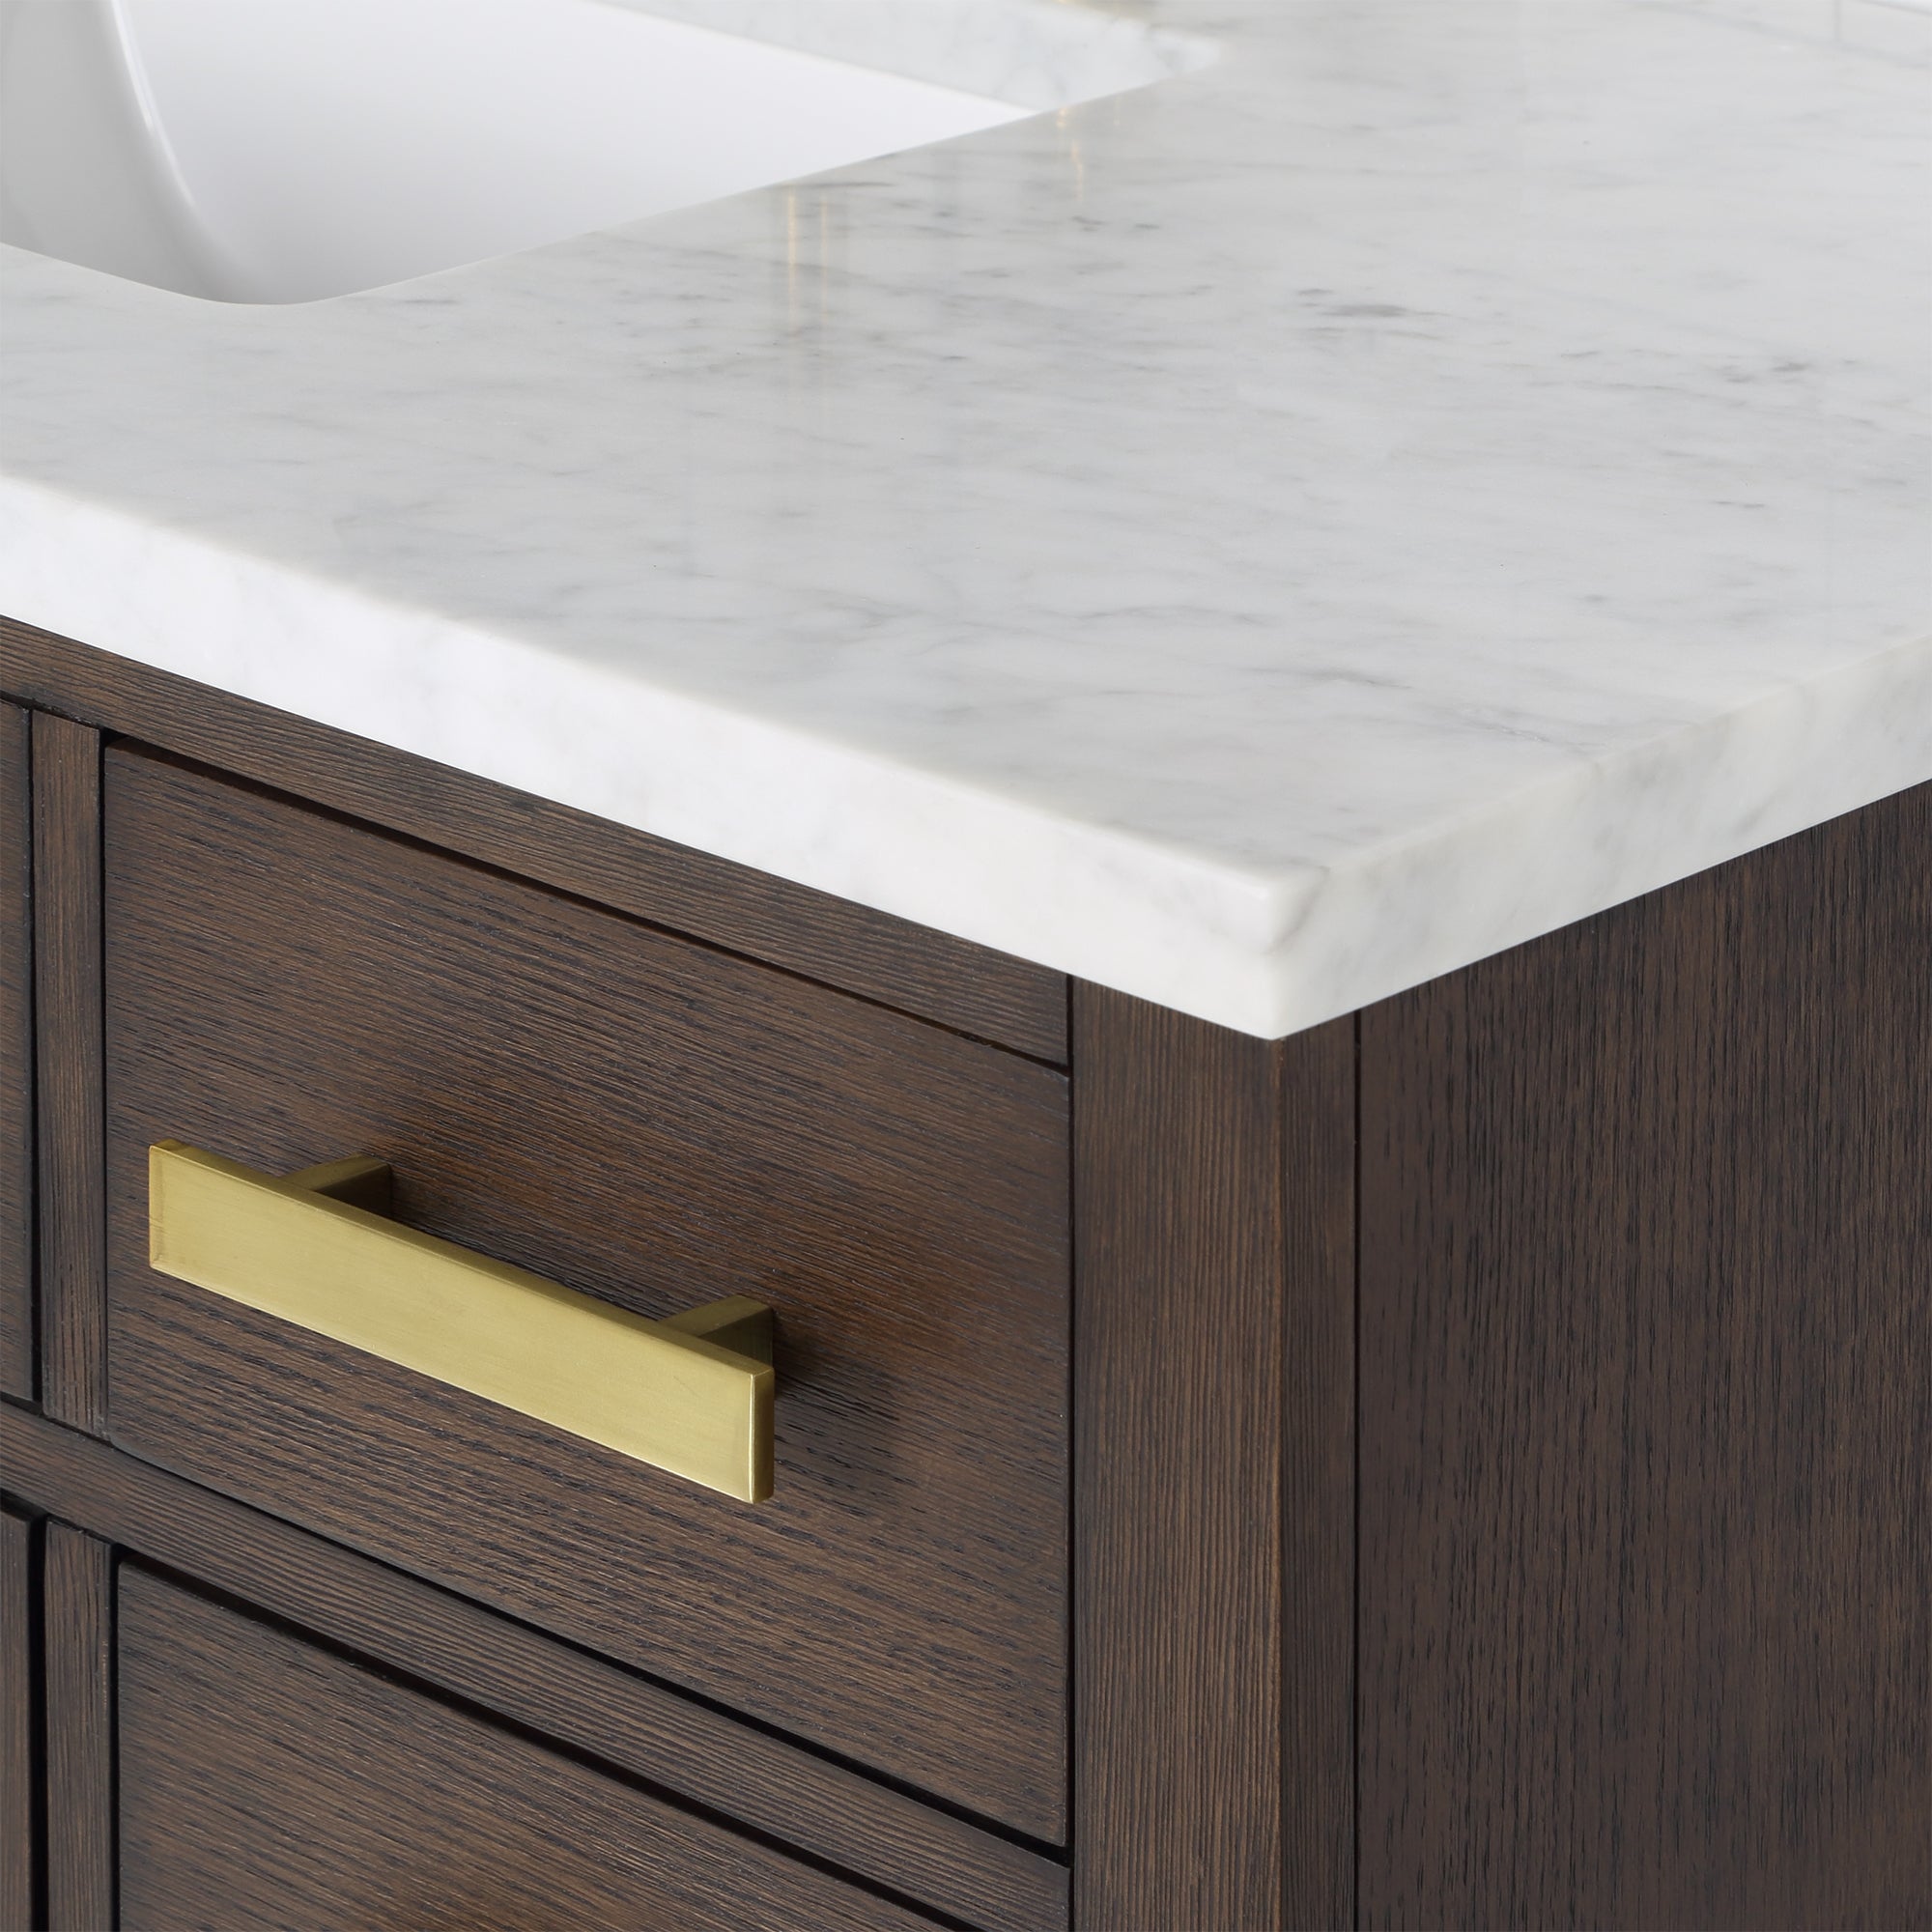 Water Creation | Chestnut 48 In. Single Sink Carrara White Marble Countertop Vanity In Brown Oak with Grooseneck Faucet and Mirror | CH48CW06BK-R21BL1406